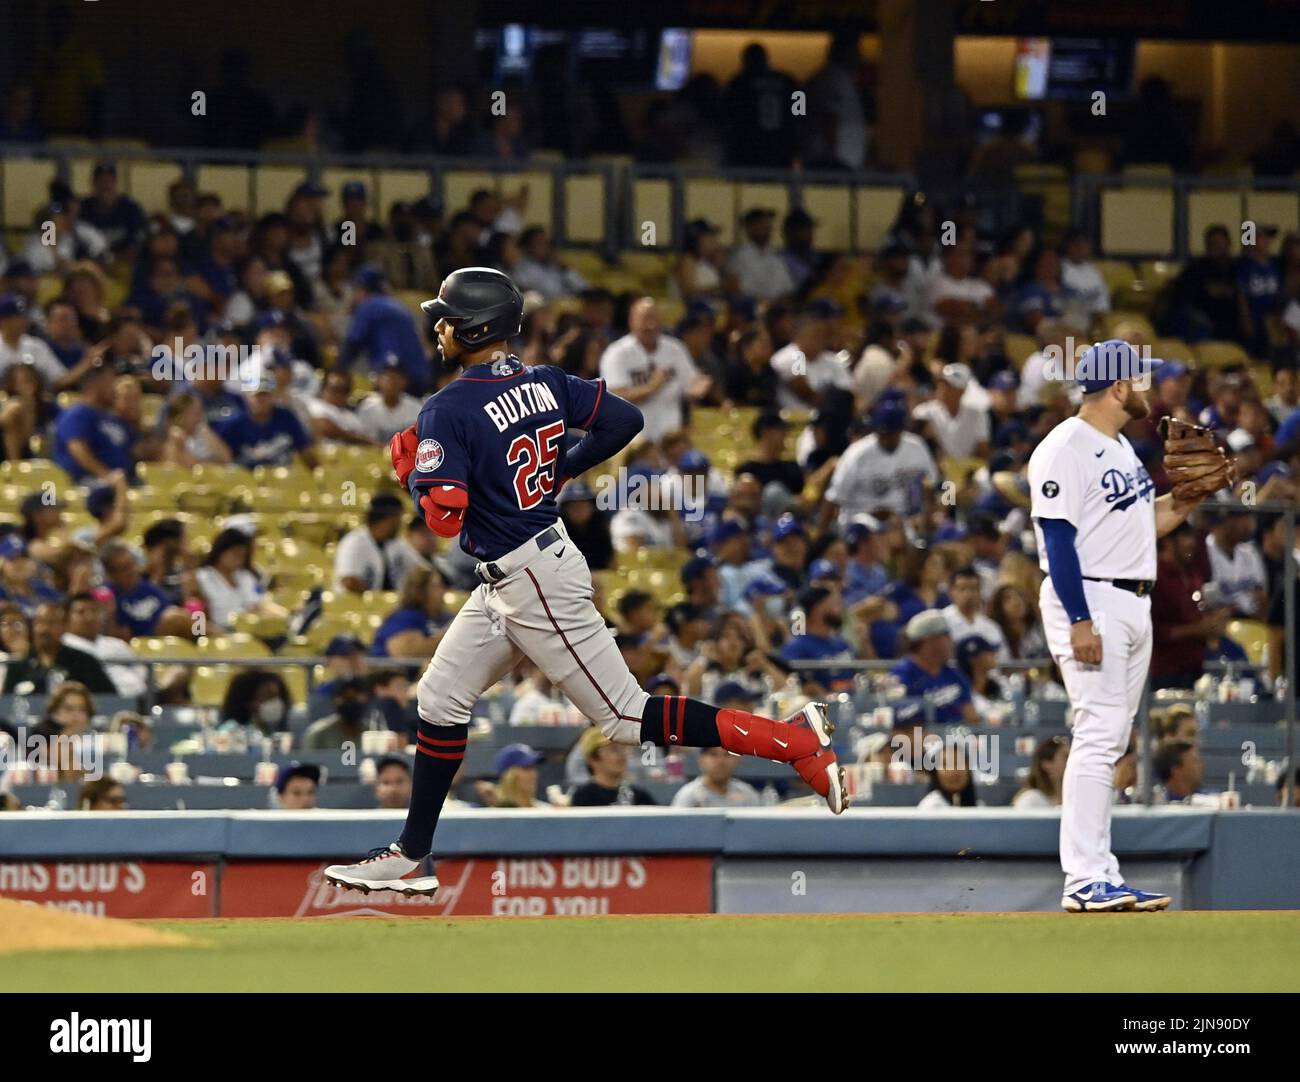 Los Angeles, United States. 10th Aug, 2022. Minnesota Twins Byron Buxton rounds the bases after hitting a two-RBI home run to center off Los Angeles relief pitcher Phil Bickford during the eighth inning at Dodger Stadium on Tuesday, August 9, 2022. The Dodgers defeated the Twins 10-3 for their ninth consecutive win. Photo by Jim Ruymen/UPI Credit: UPI/Alamy Live News Stock Photo